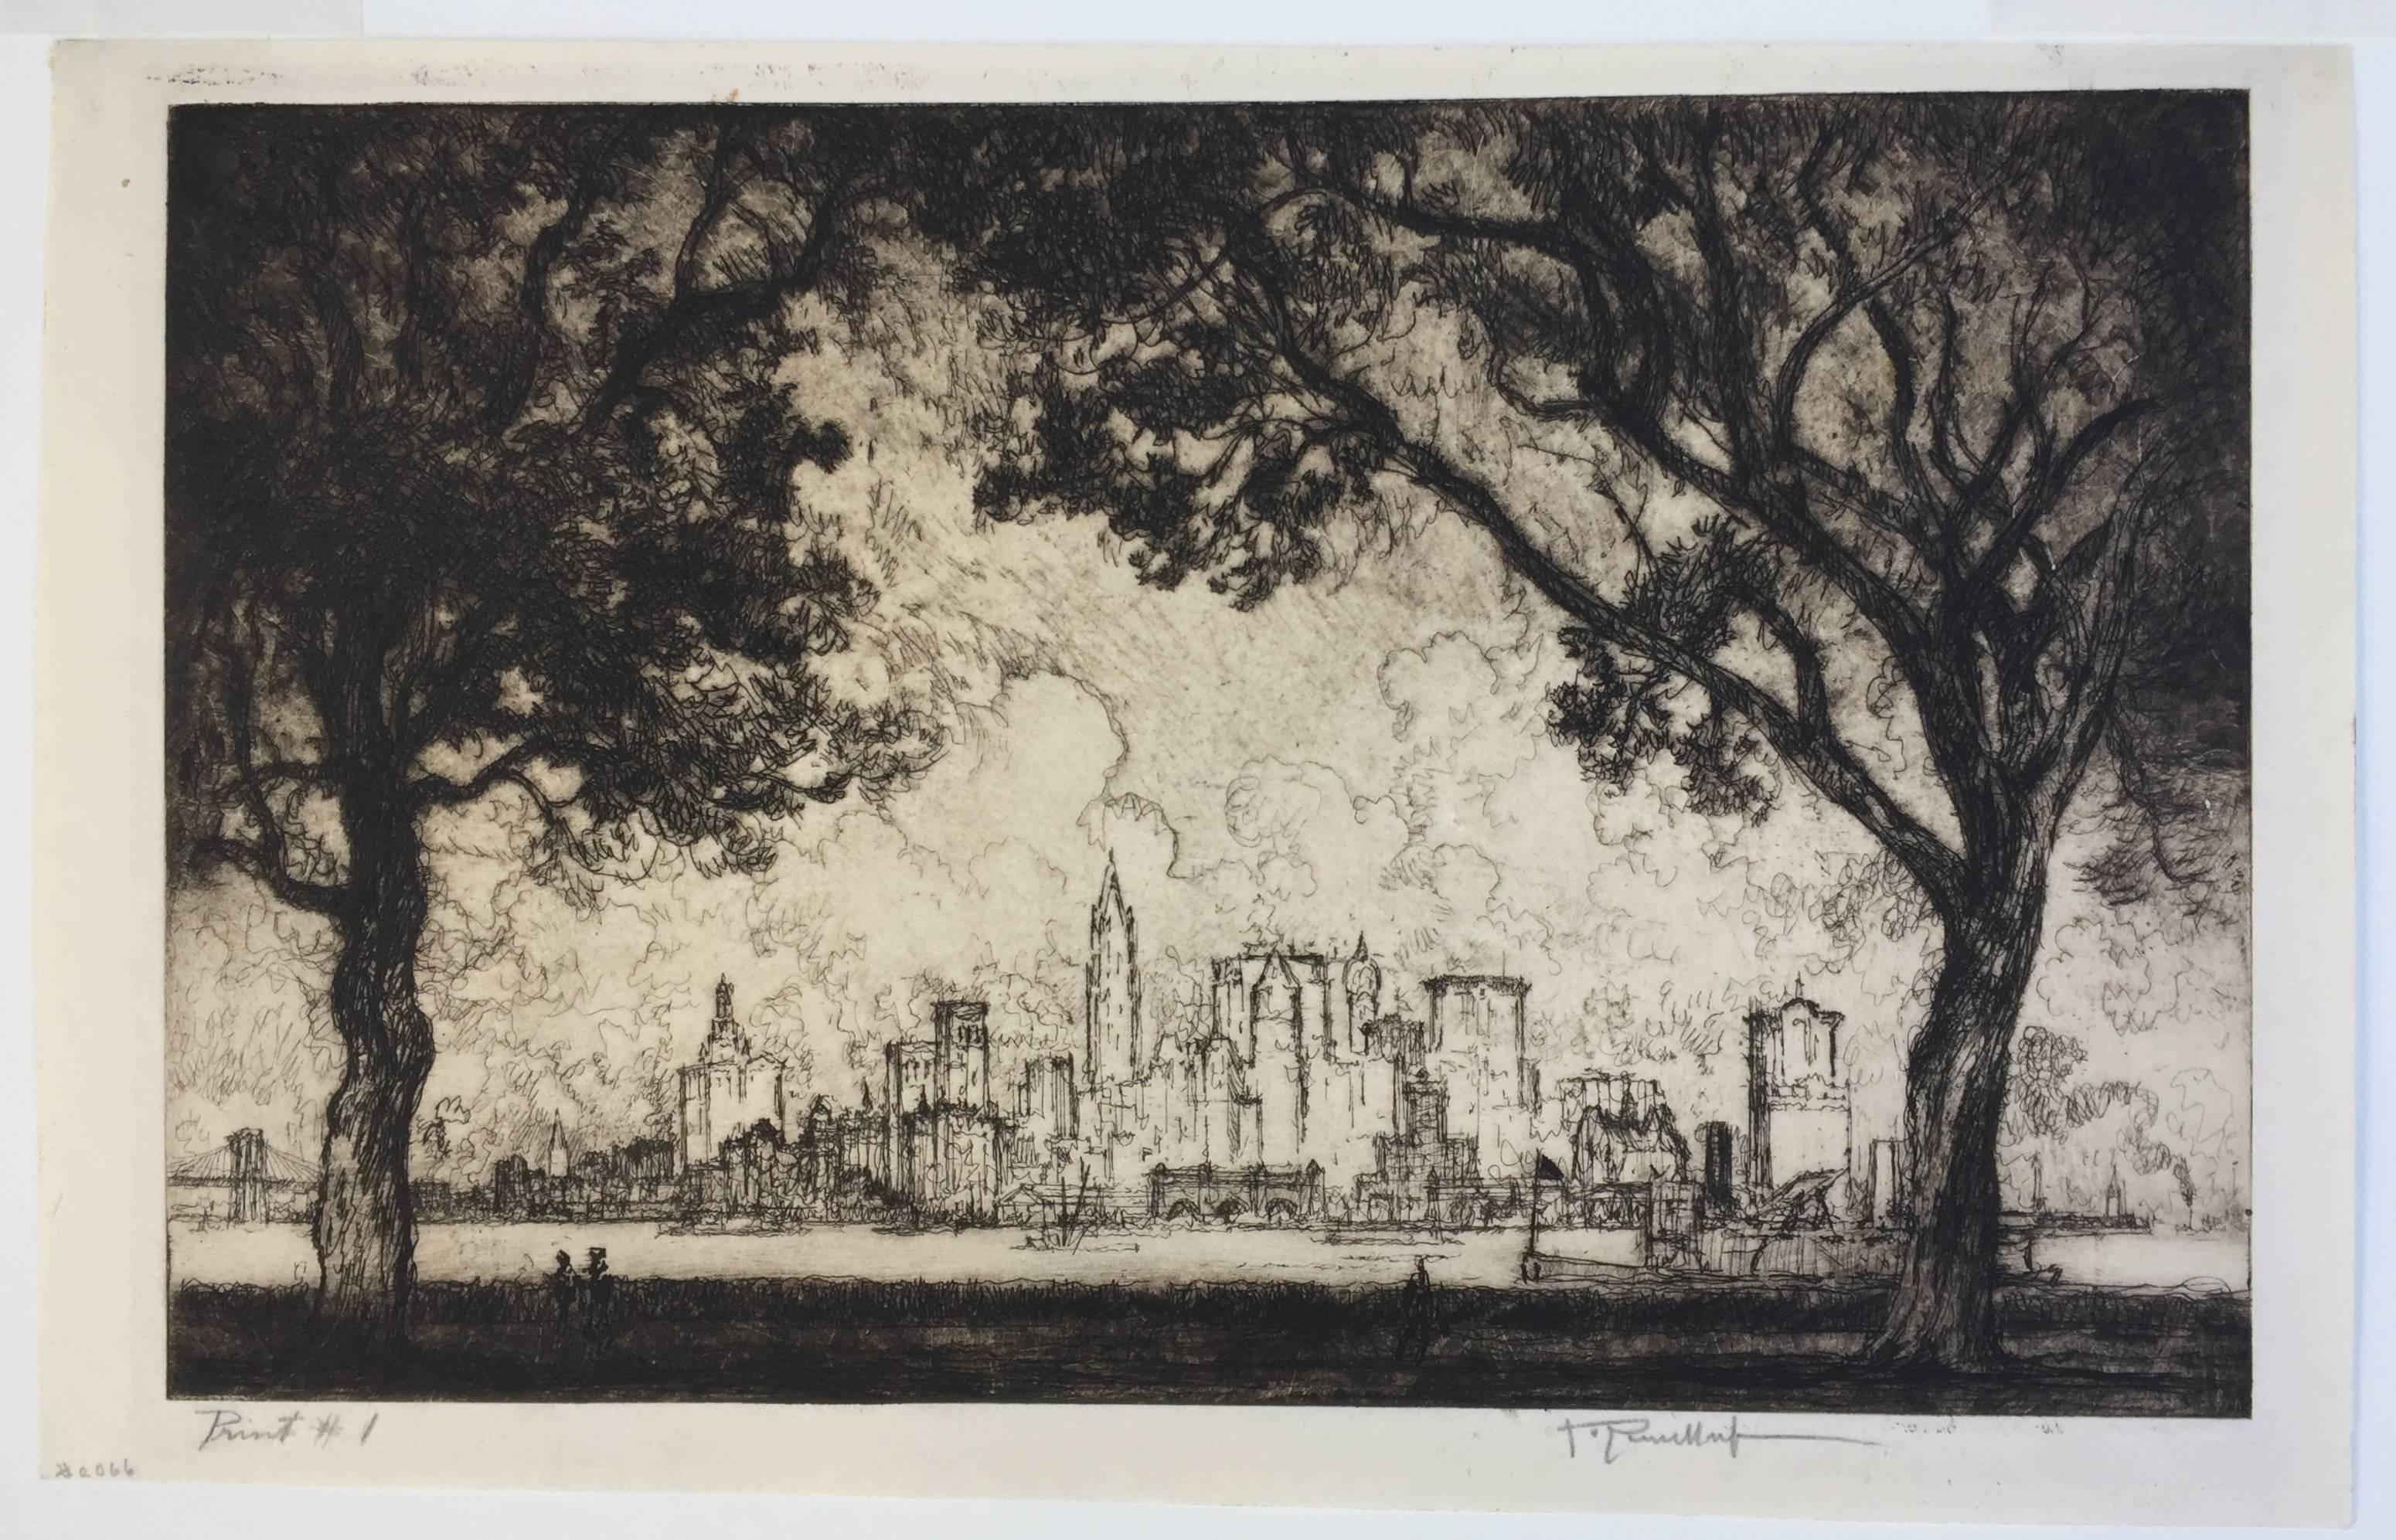 NEW YORK FROM GOVERNOR'S ISLAND - Print by Joseph Pennell